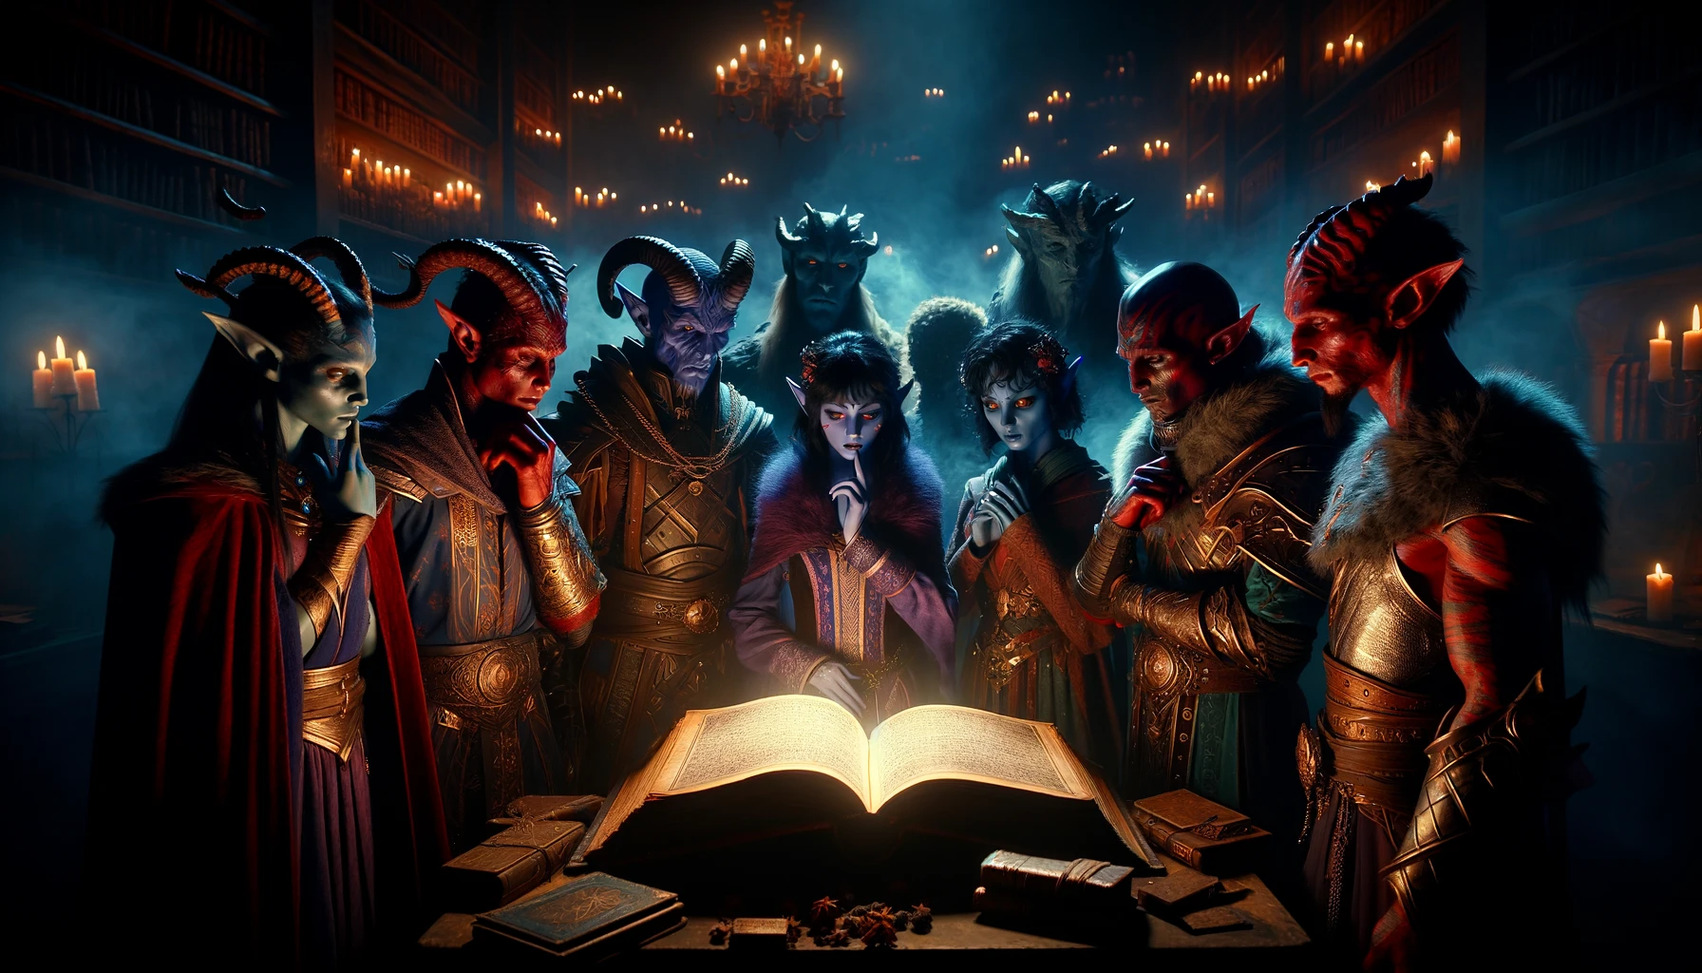 the cinematic image depicting a group of tieflings gathered around an ancient, glowing book in a dimly lit library. This scene captures the mystery and magic associated with tieflings in a fantasy setting.